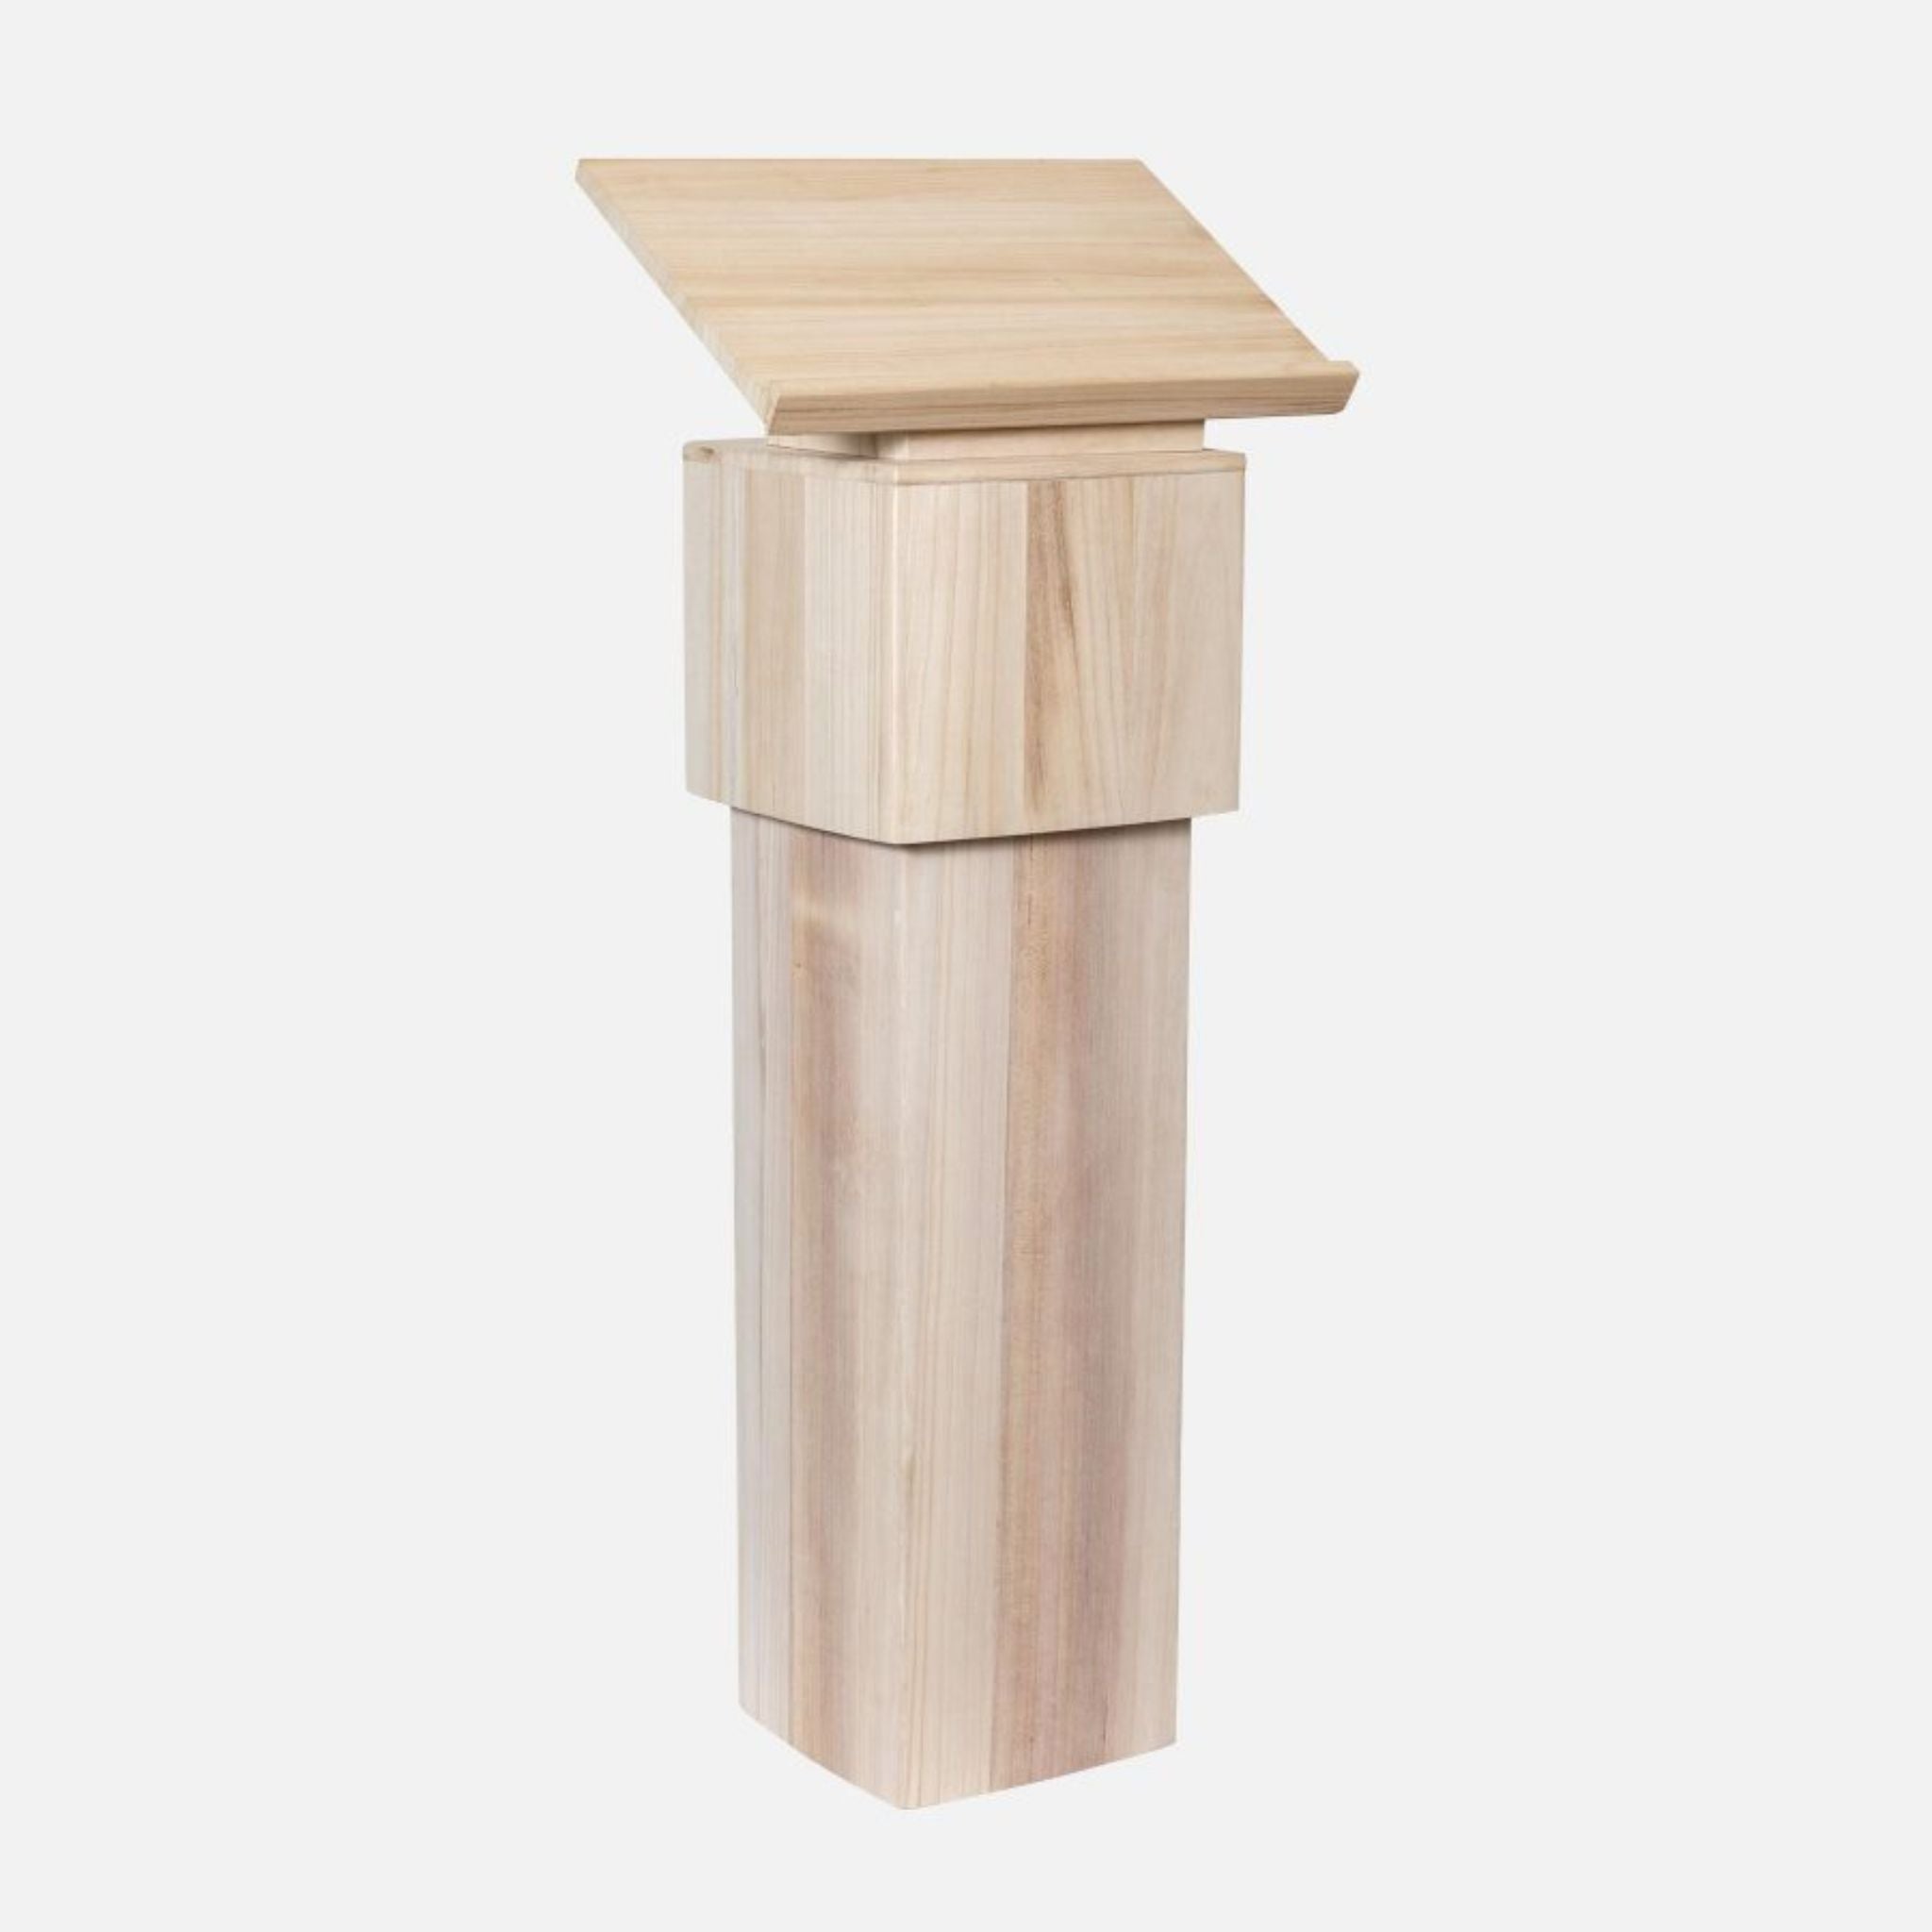 Lectern made of light wood